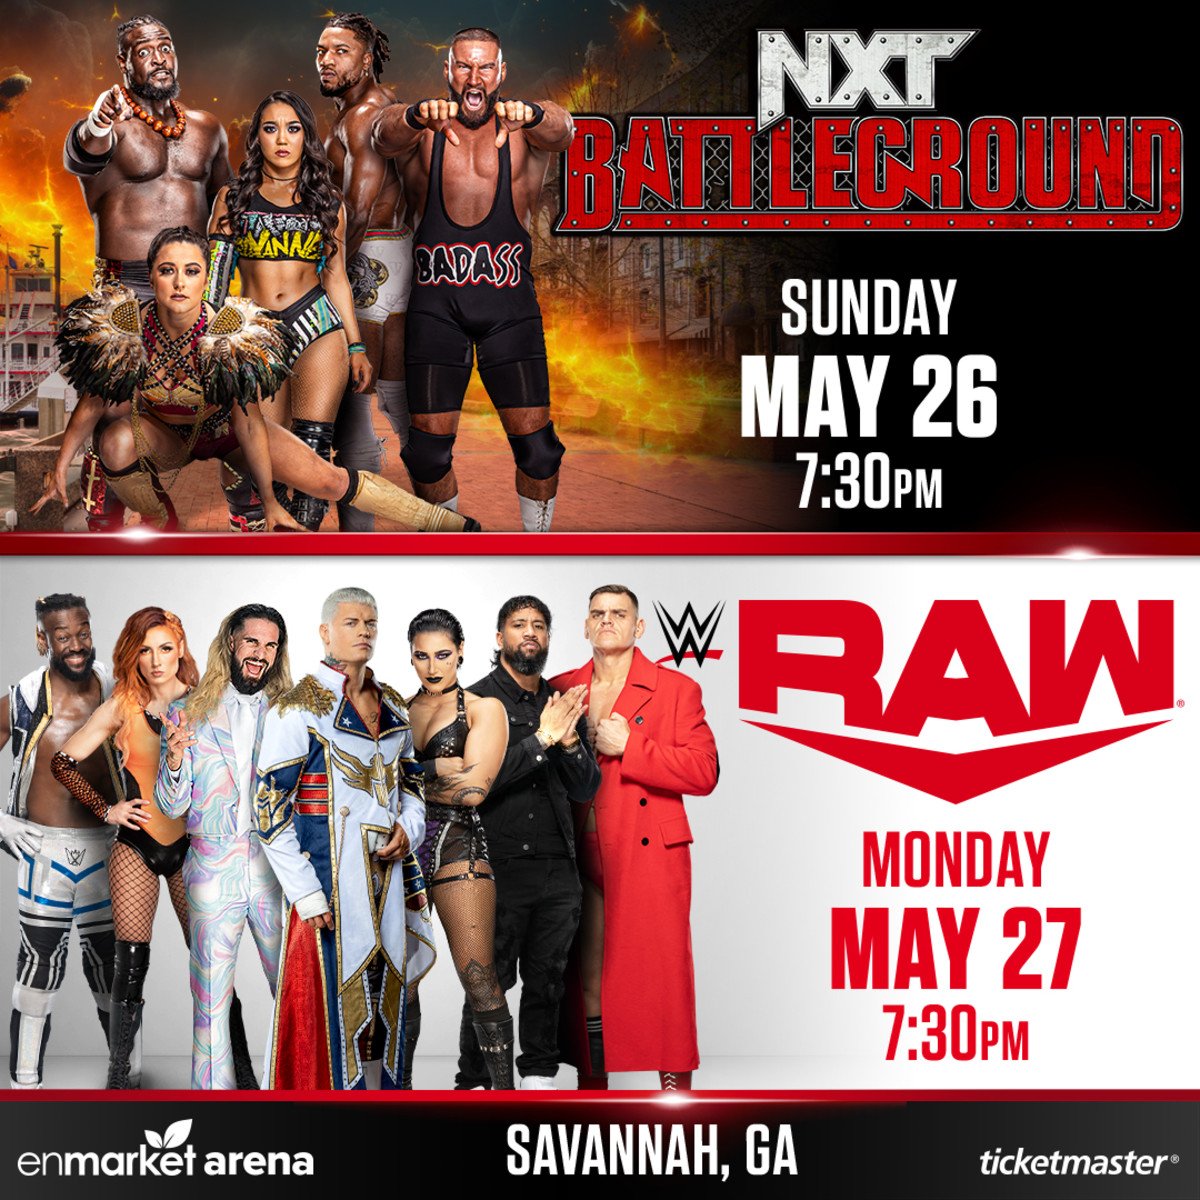 NXT Battleground is set to take place in Savannah, Georgia on May 26 as well as Raw being in the same place on May 27